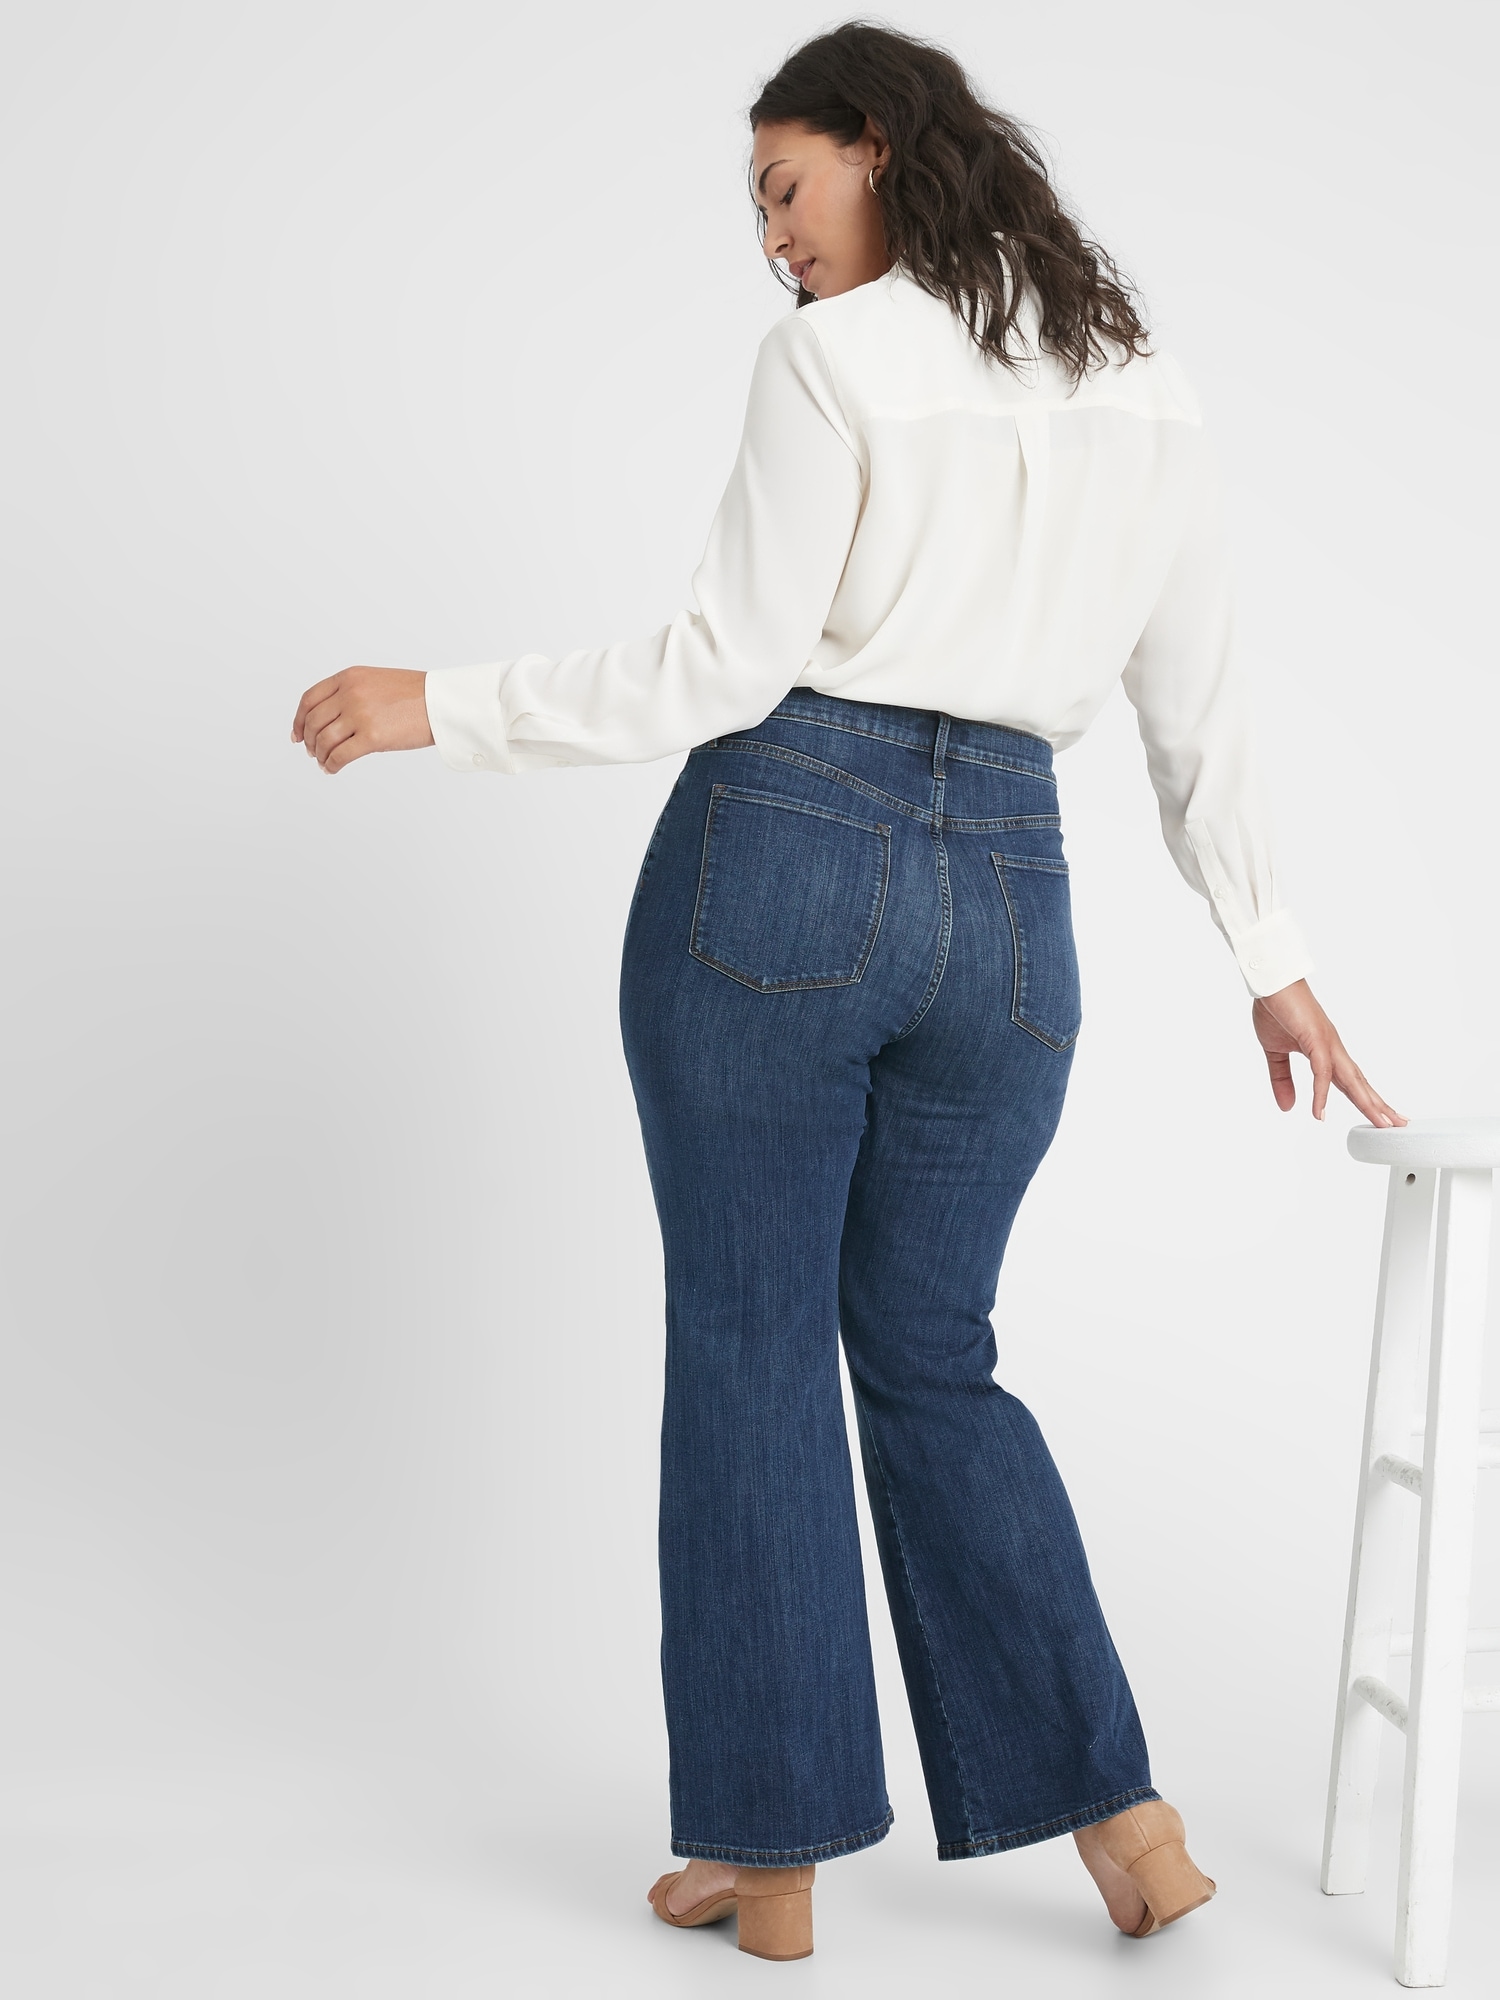 good jeans for curvy petites